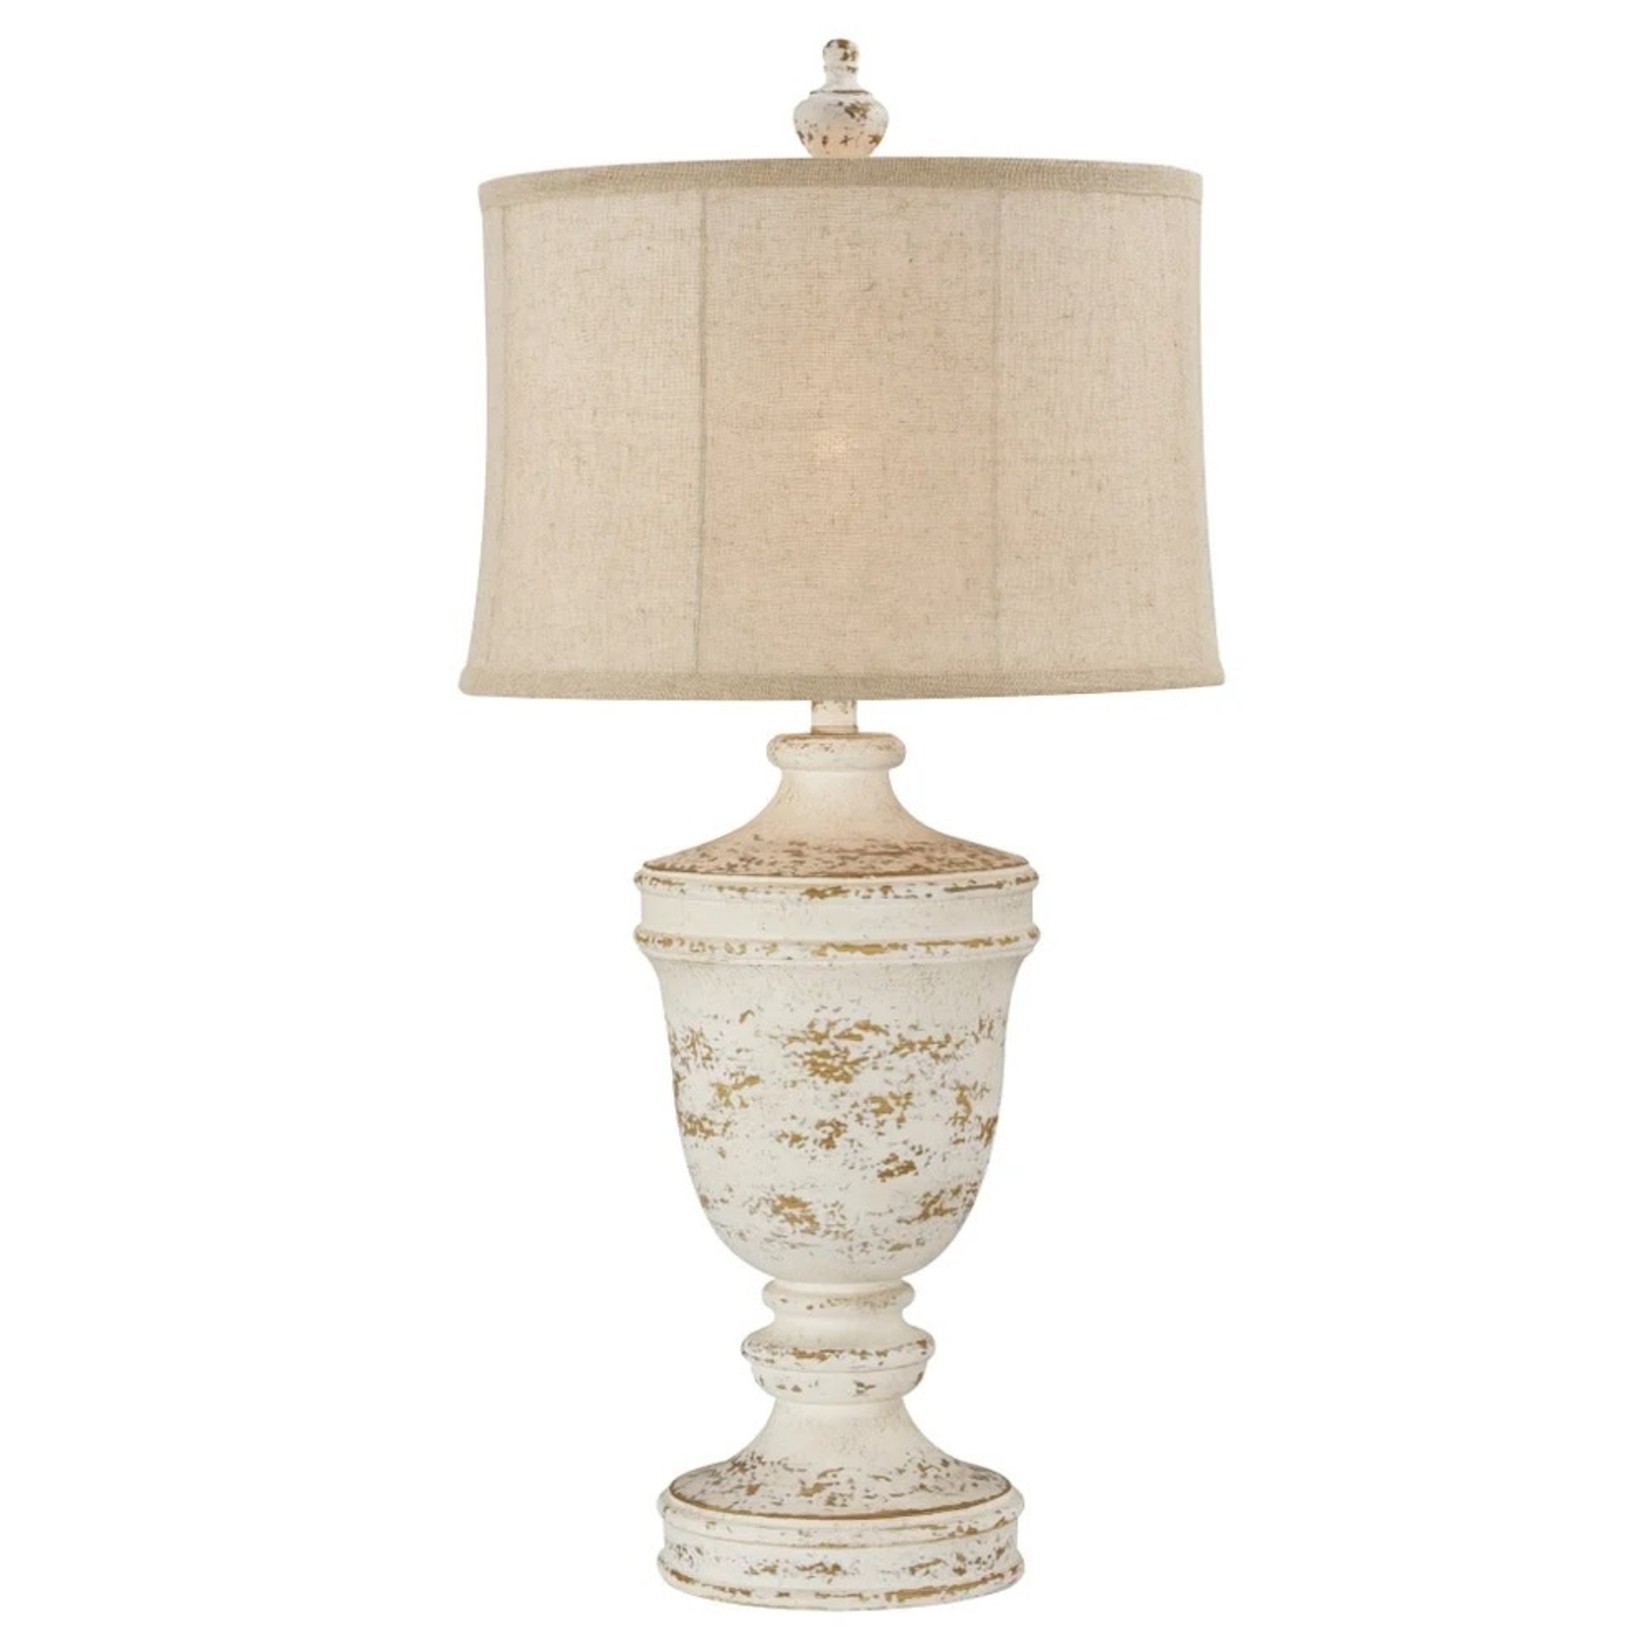 FORTY WEST CHRISSY TABLE LAMP